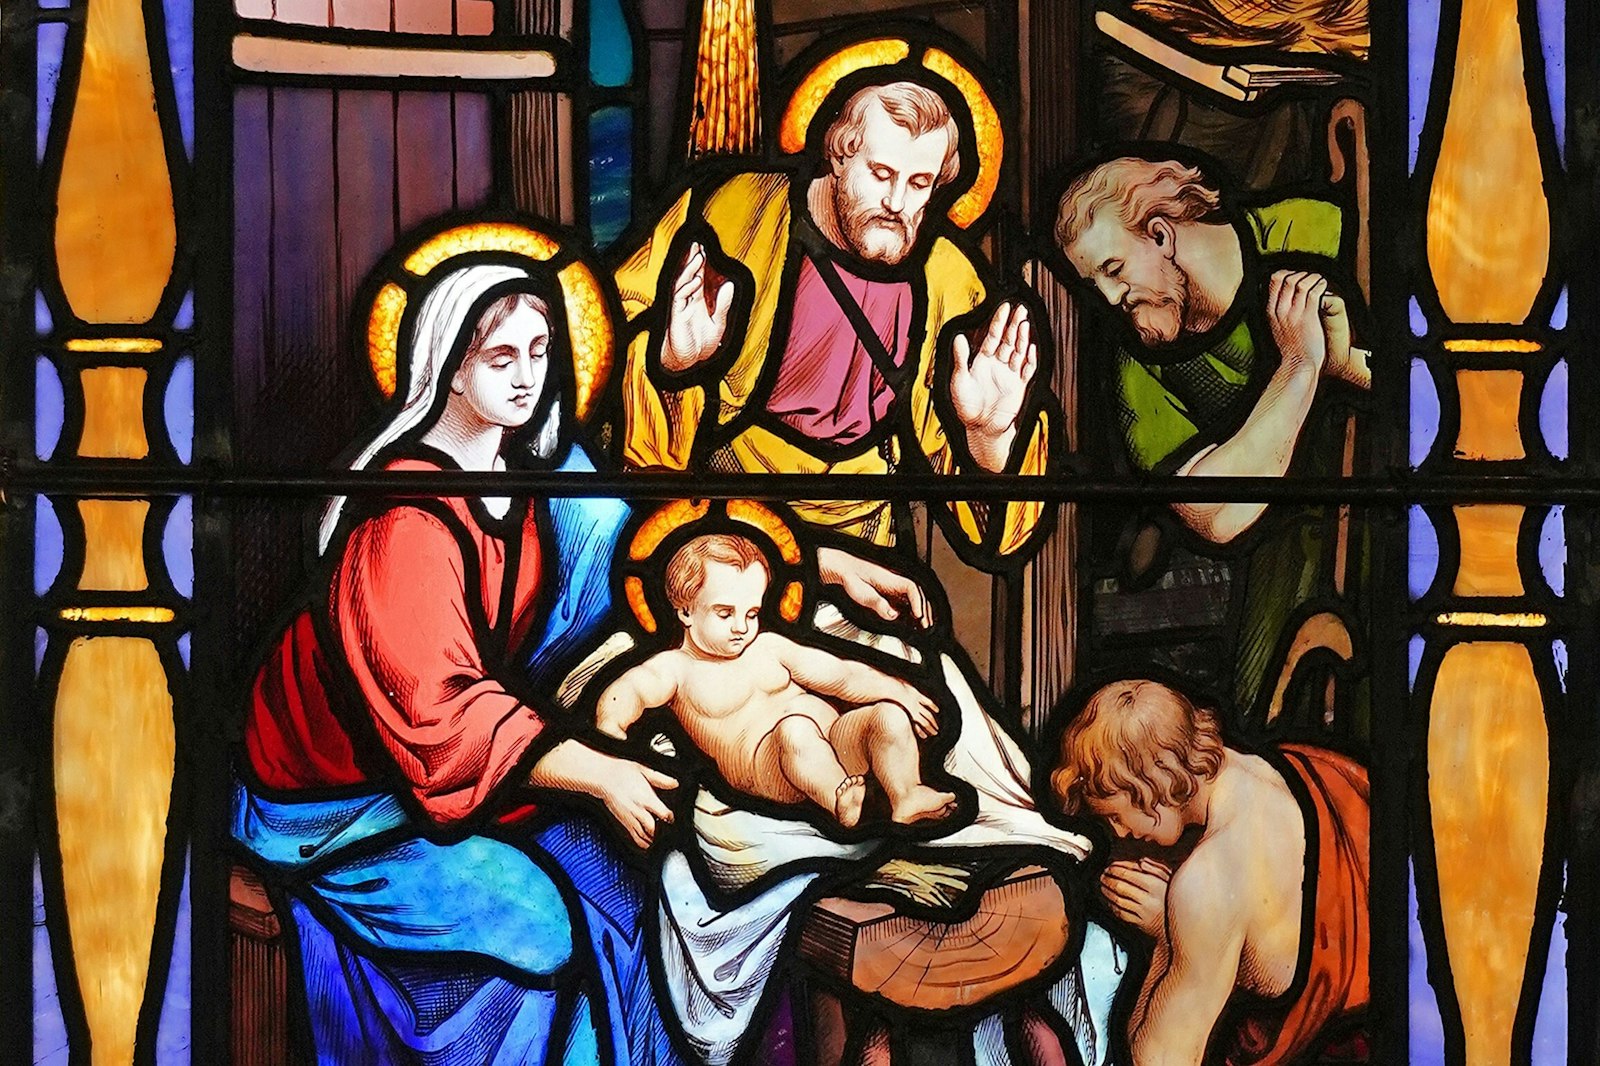 The birth of Jesus is depicted in a stained-glass window at St. Mary of the Isle Church in Long Beach, N.Y. (CNS photo/Gregory A. Shemitz)